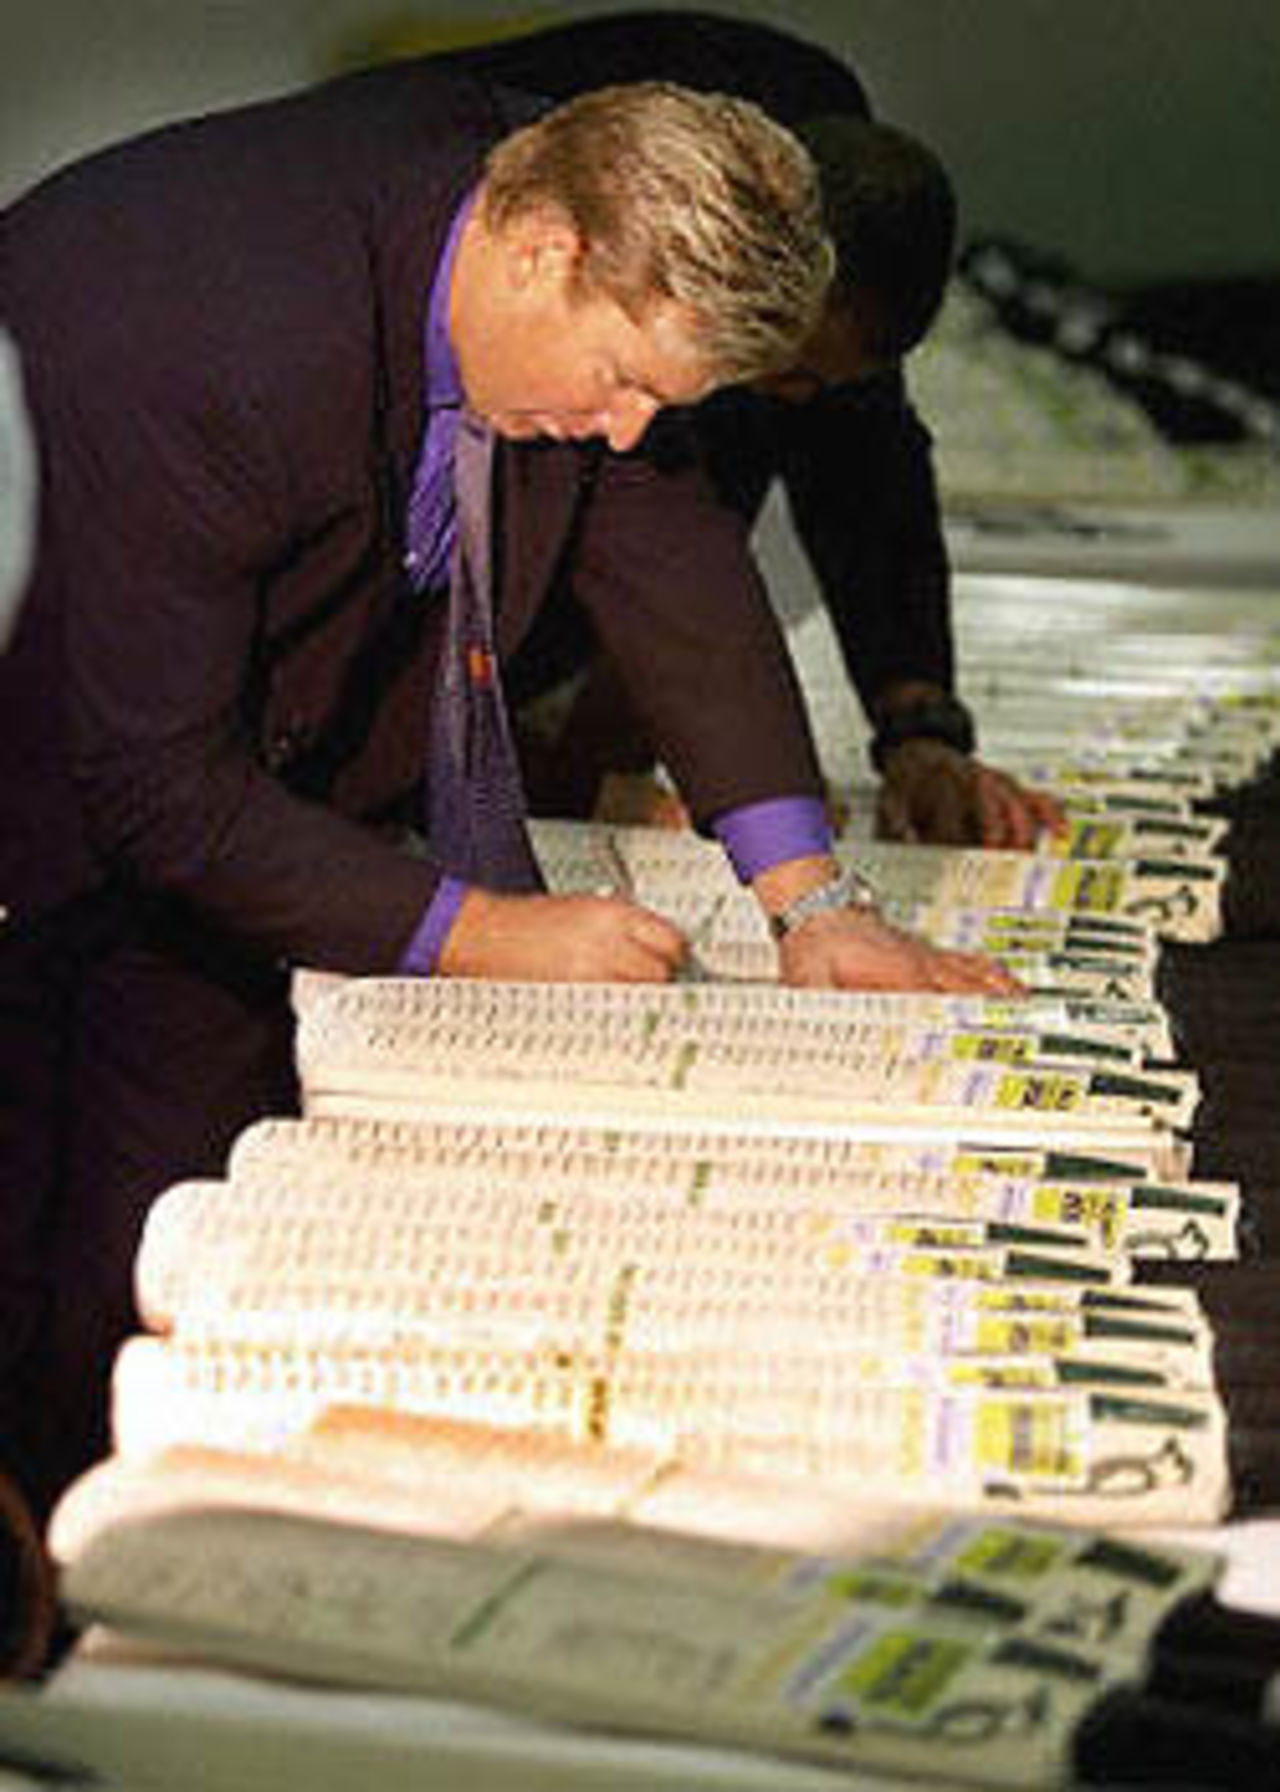 Australian spinner Shane Warne signs cricket bats as he prepares for his first game for Australia after losing the vice-captain's position when they meet South Africa under the closed roof of the Colonial Stadium in Melbourne, 14 August 2000. Australia and South Africa will create history when play the first one-day cricket matches to be played indoors when they meet on 16, 18 and 20 August. Super Challenge 2000.